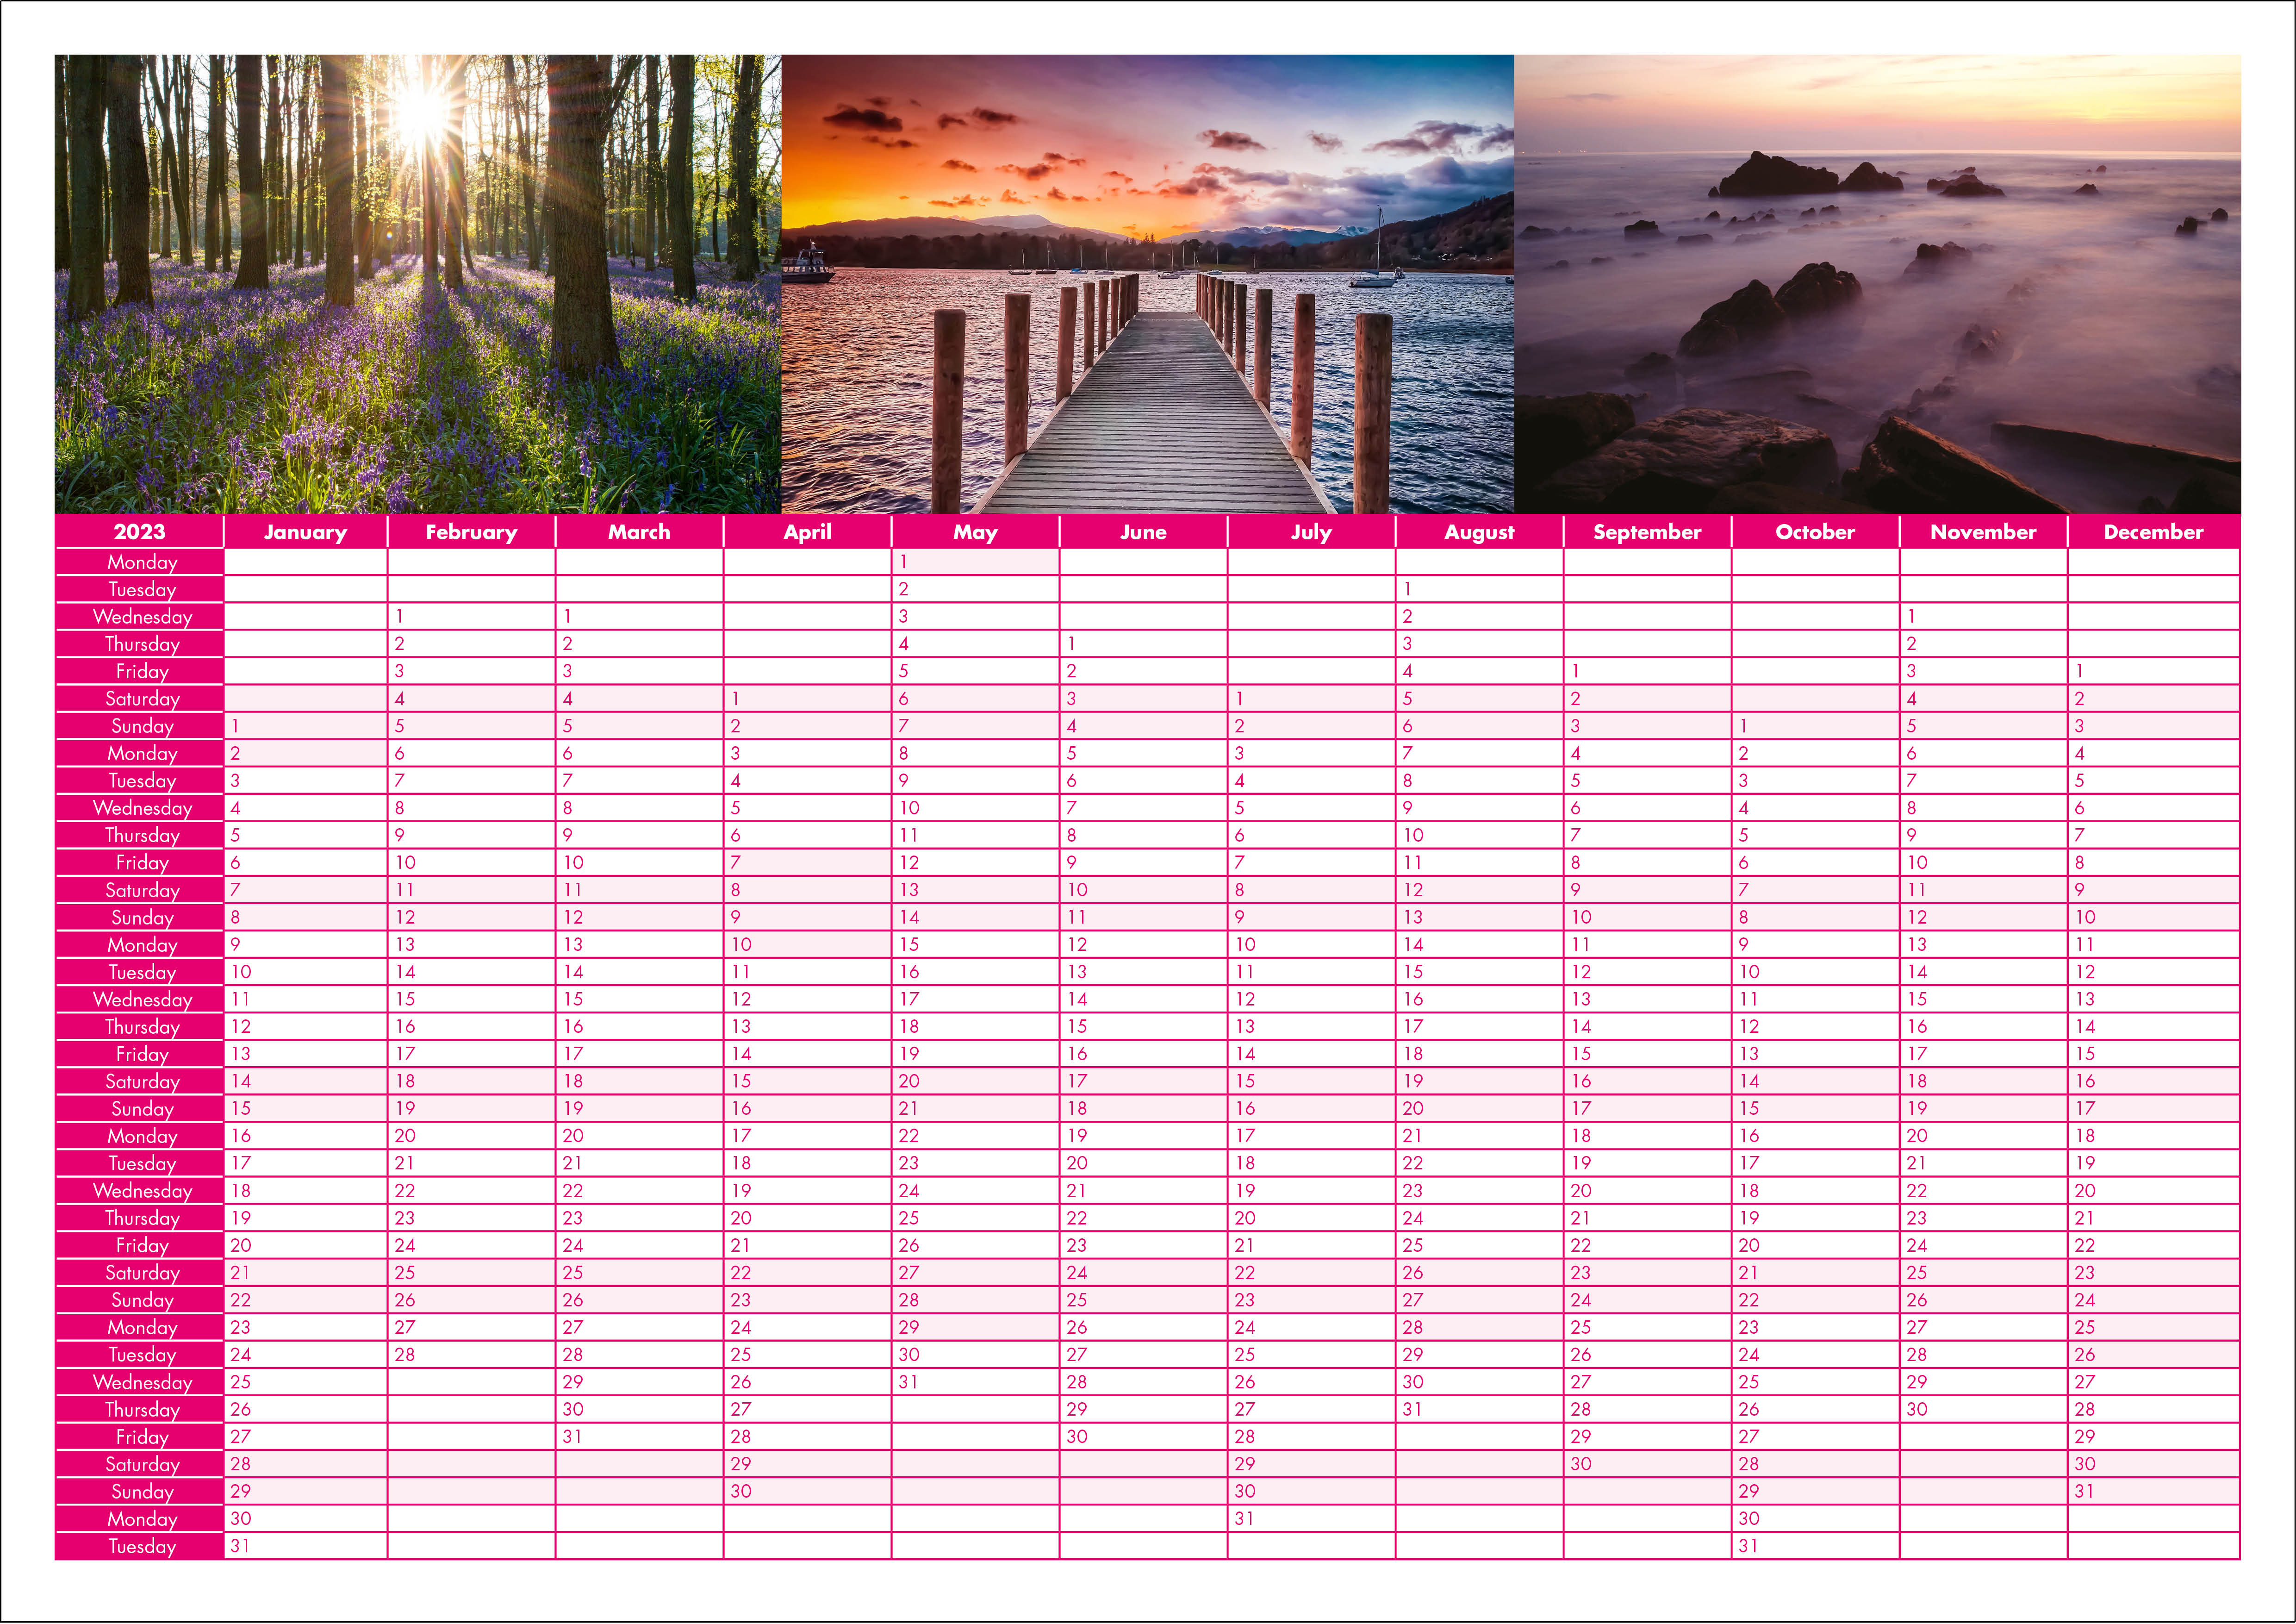 Picture of Yearplanner W08 Hot Pink